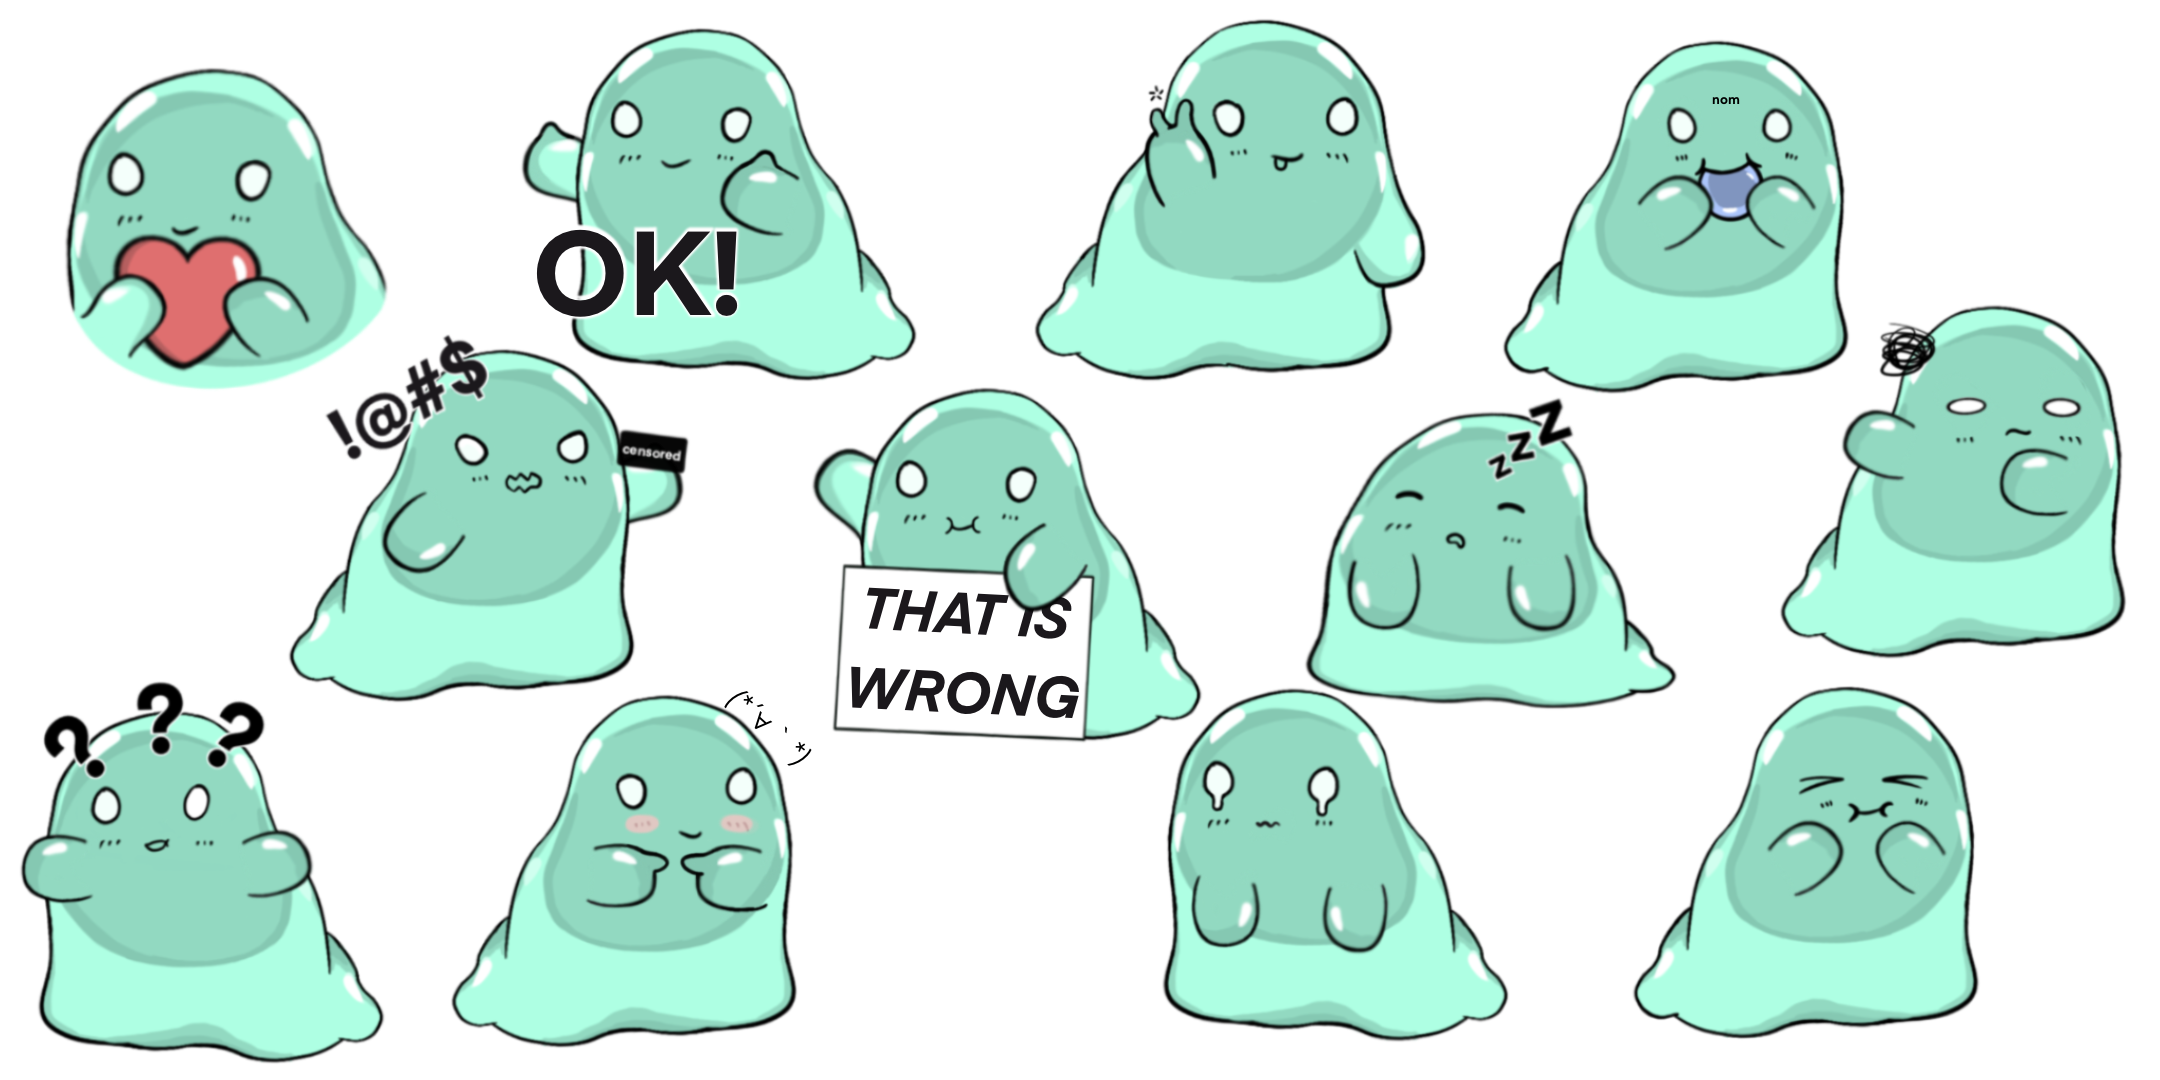 Cute slime stickers made for telegram and whatsapp image